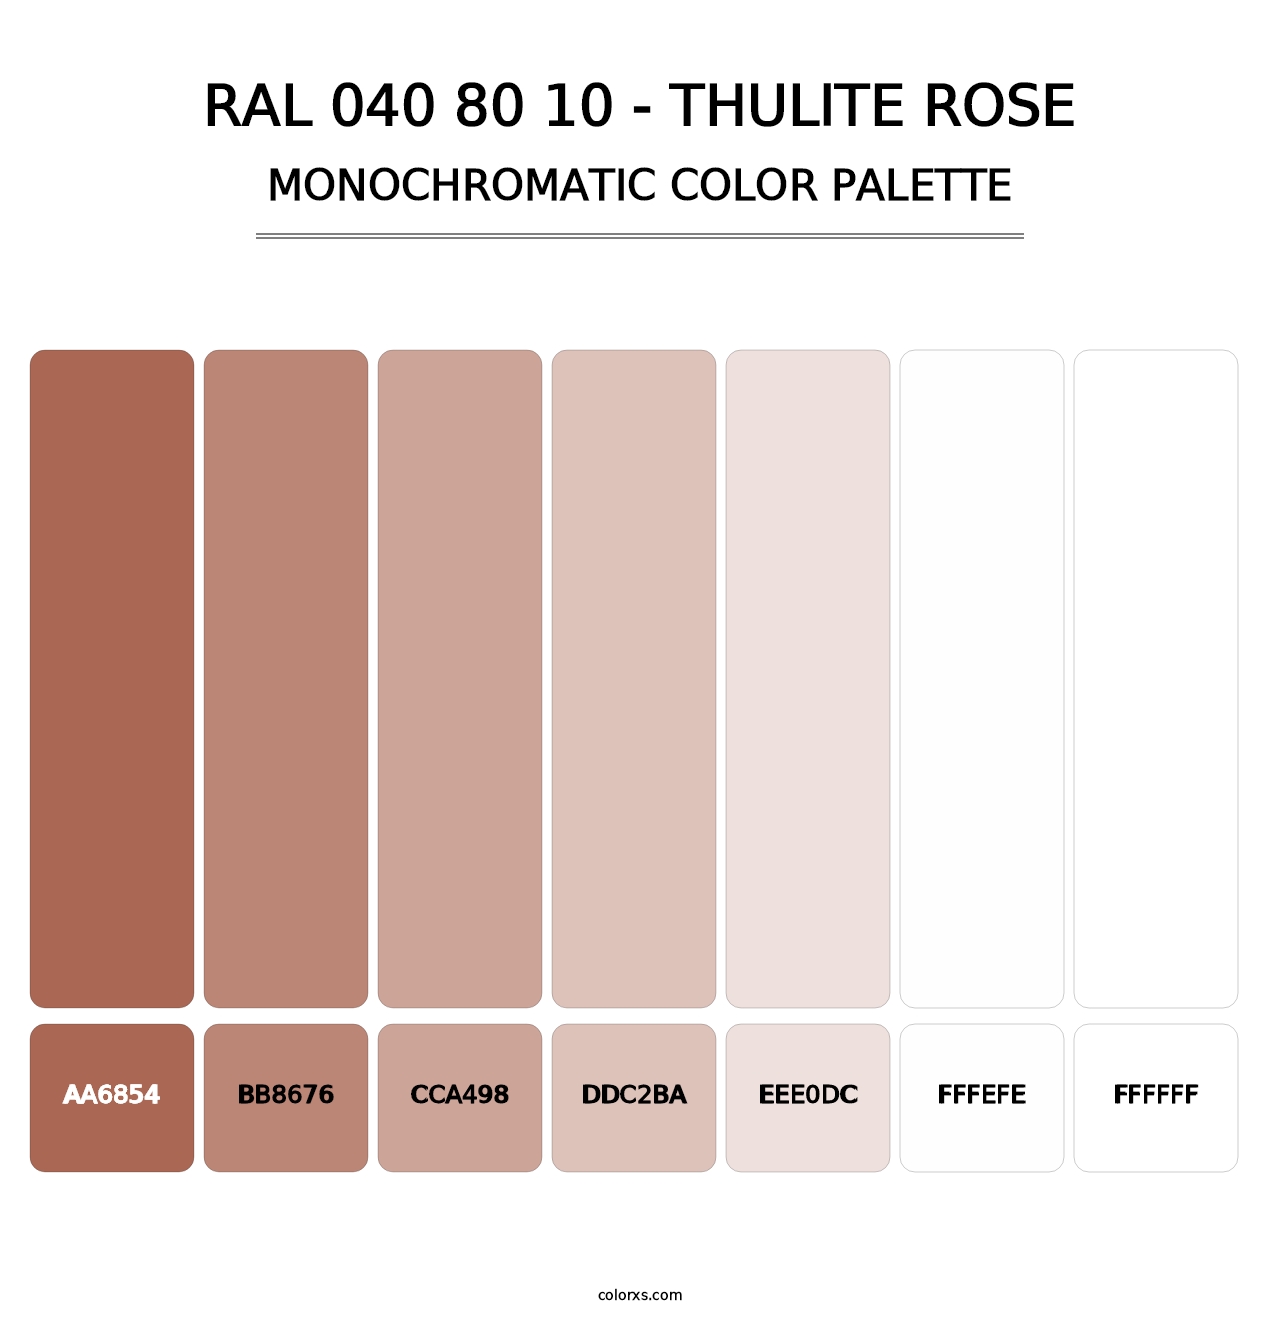 RAL 040 80 10 - Thulite Rose - Monochromatic Color Palette